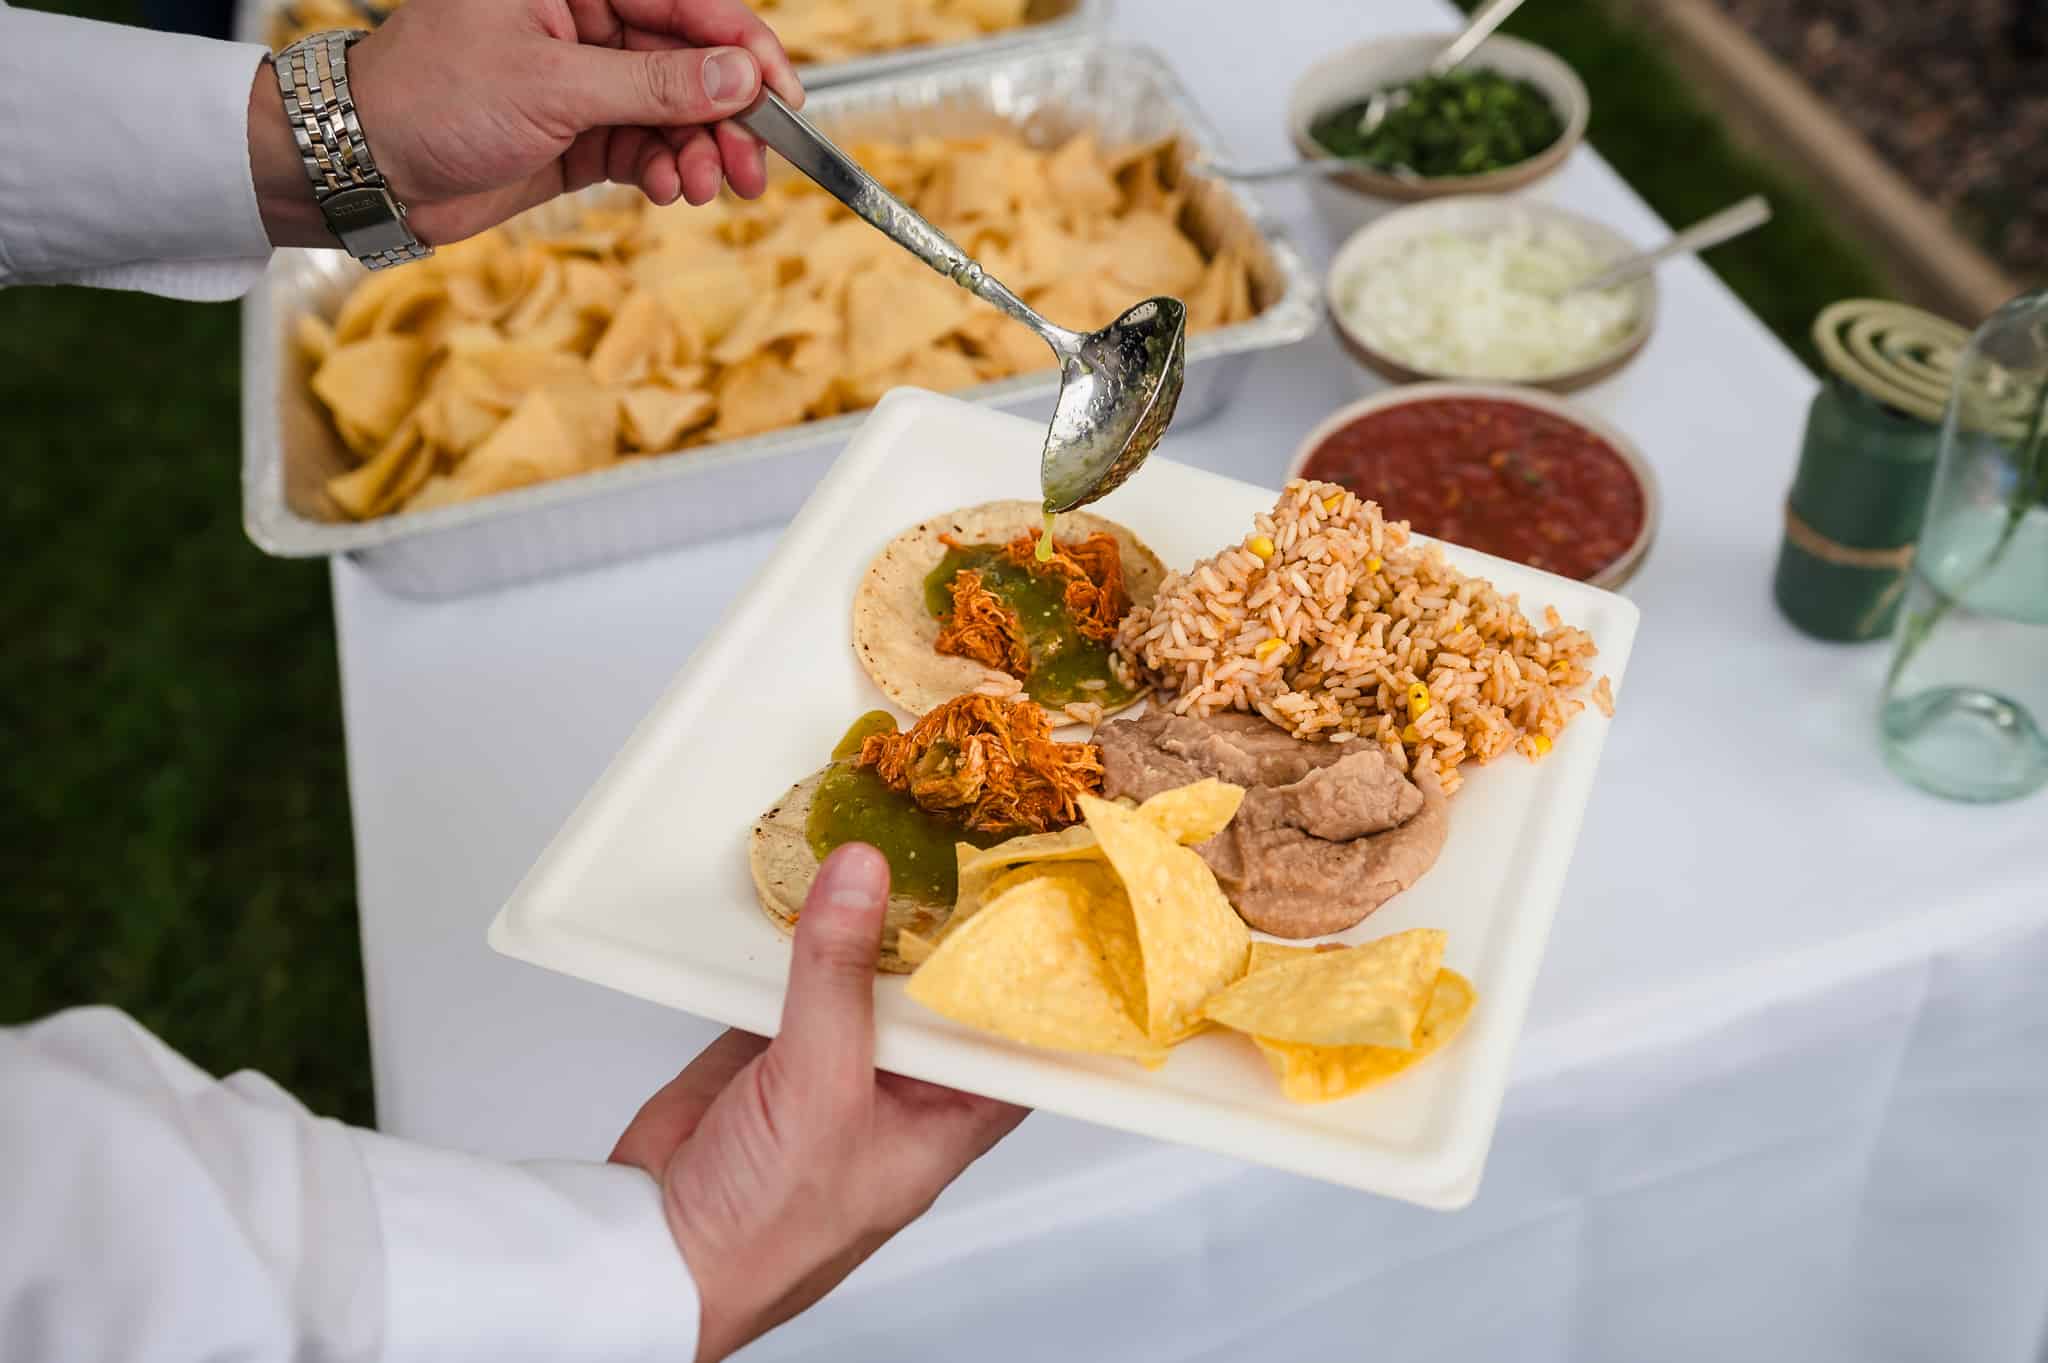 A guests serves up a plate of tacos and adds one of many available sauces on the top.